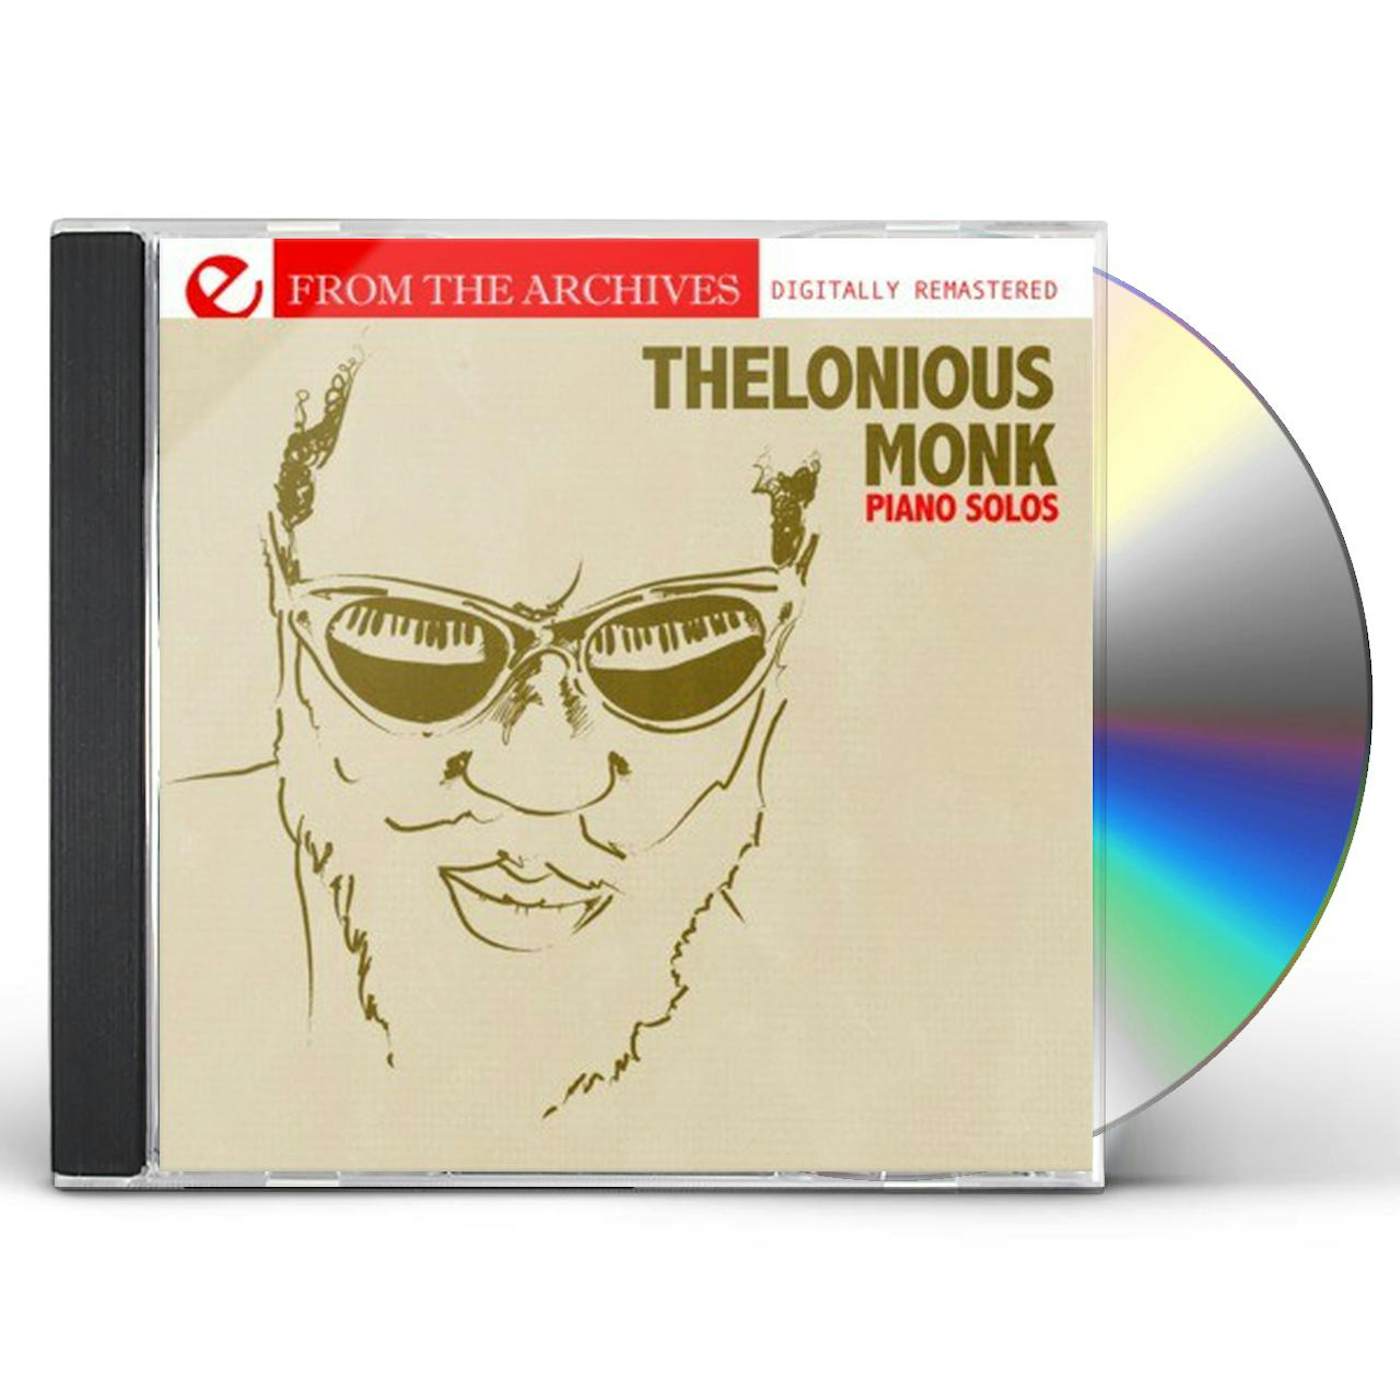 Thelonious Monk PIANO SOLOS - FROM THE ARCHIVES CD